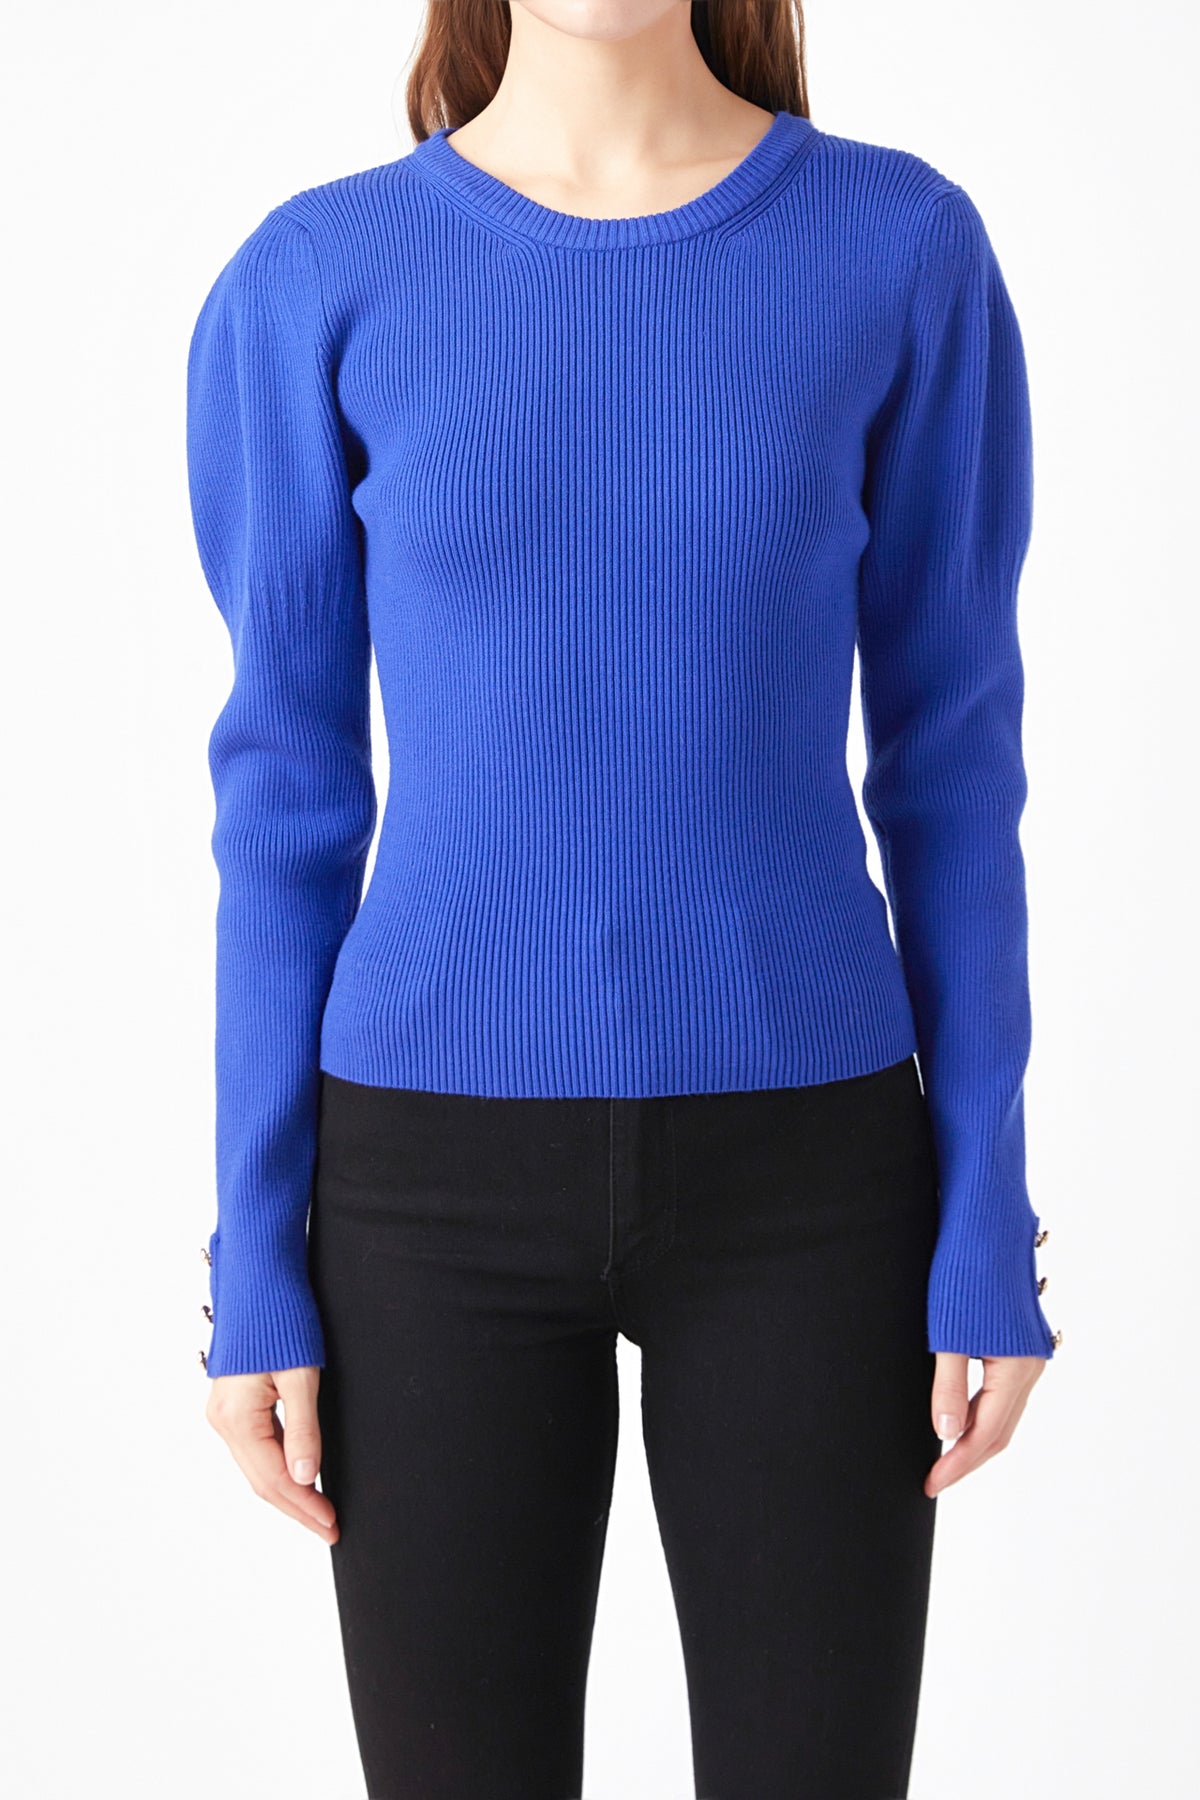 ENDLESS ROSE - Puff Sleeve Top - SWEATERS & KNITS available at Objectrare